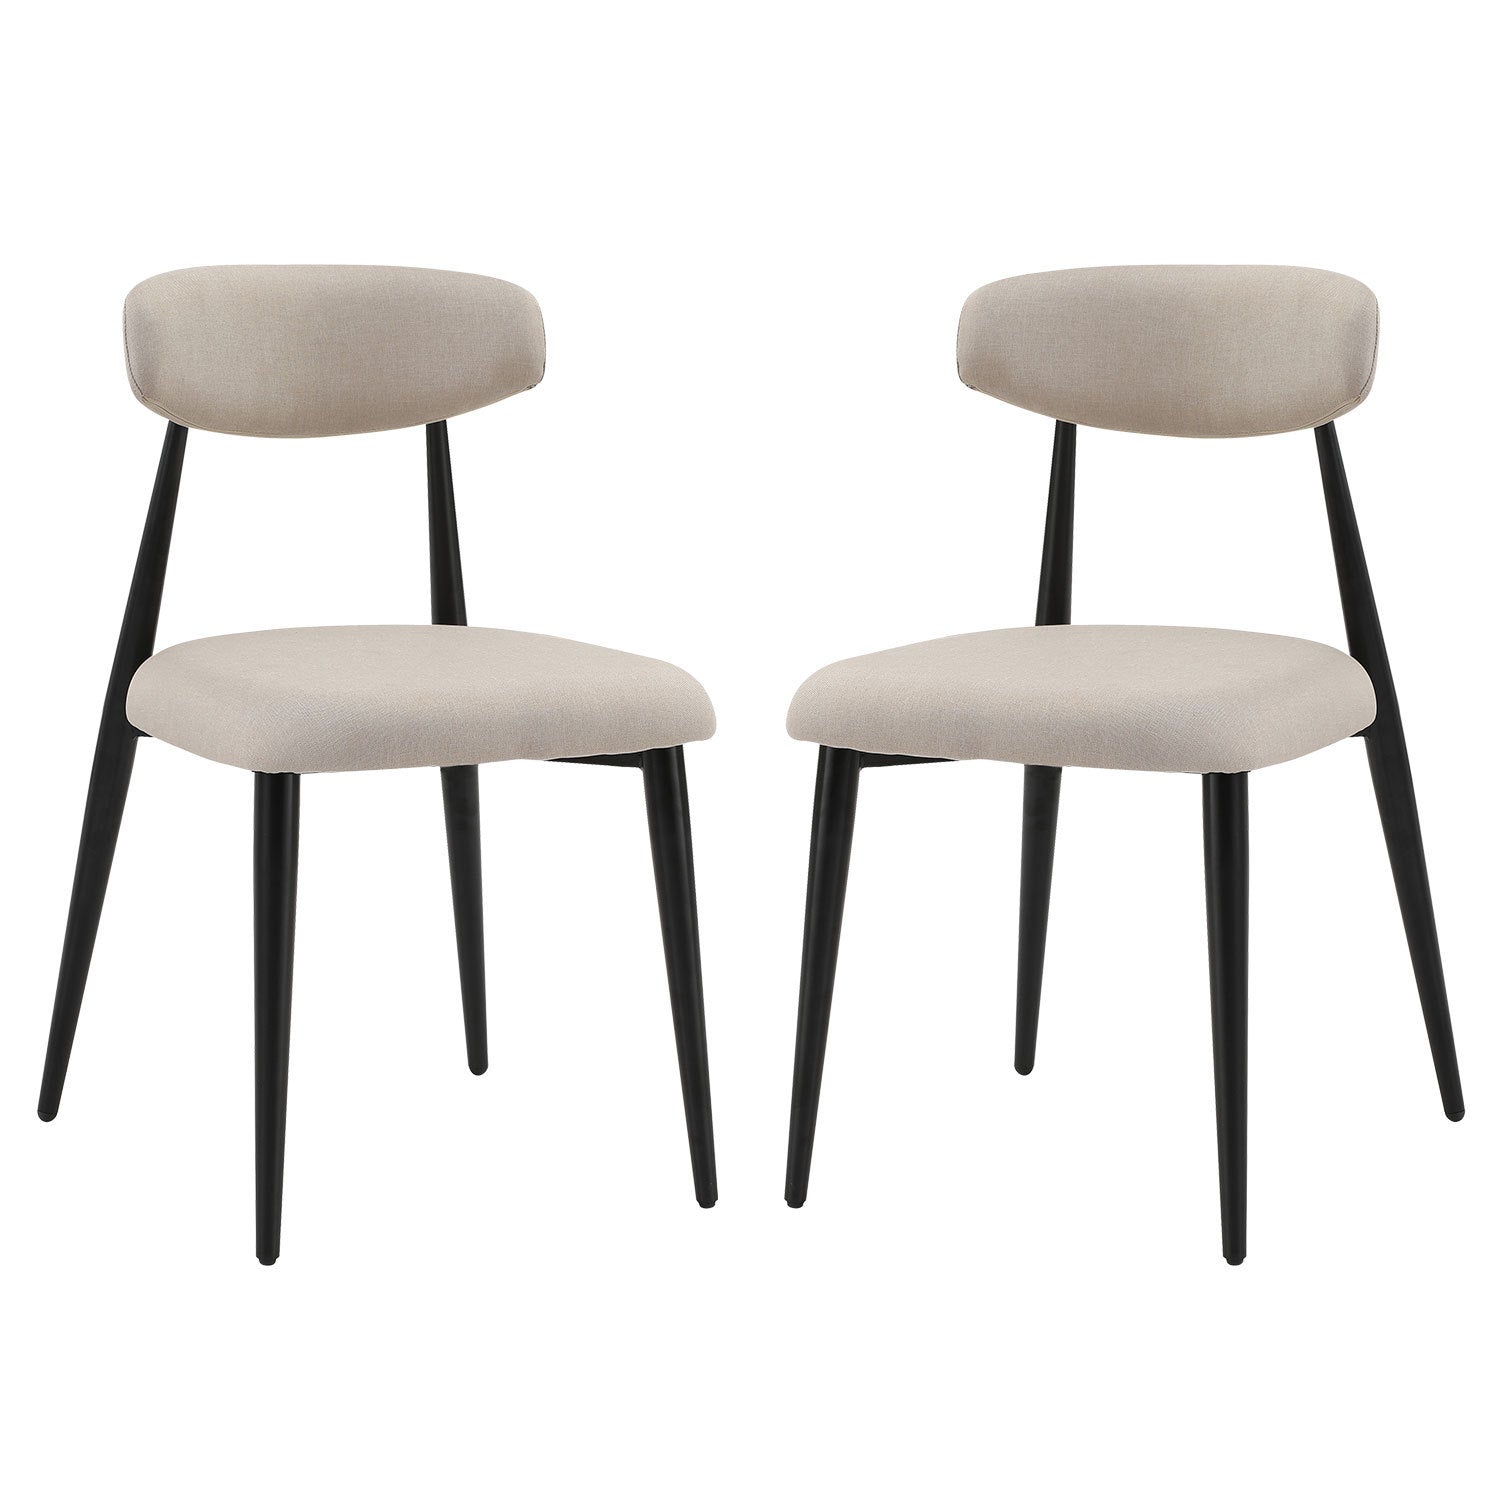 Modern Dining Chairs  Curved Backrest Round (Set of 2 Light Grey